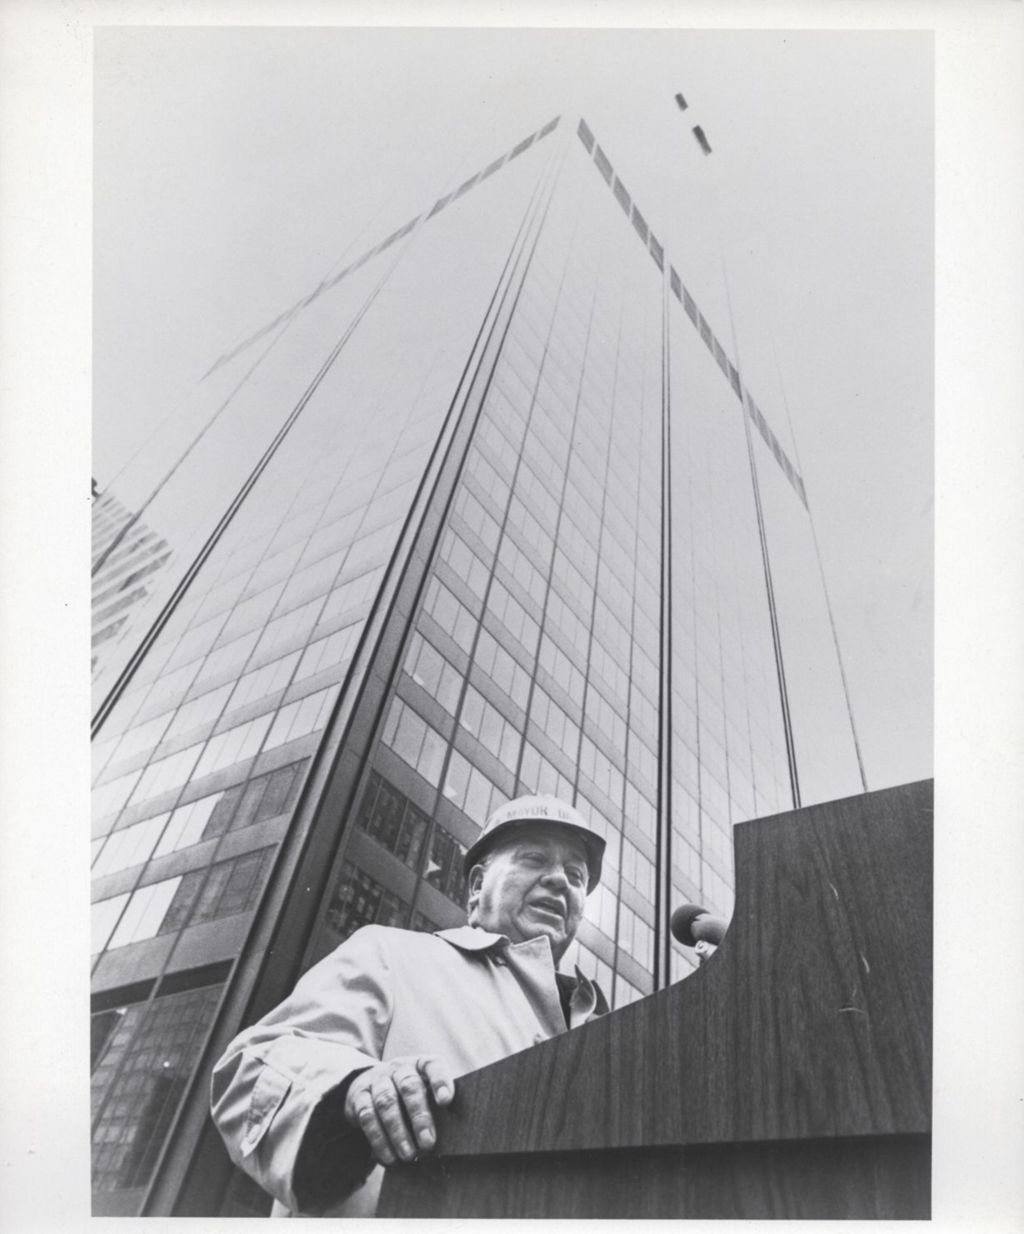 Richard J. Daley speaks at the dedication of the Sears Tower